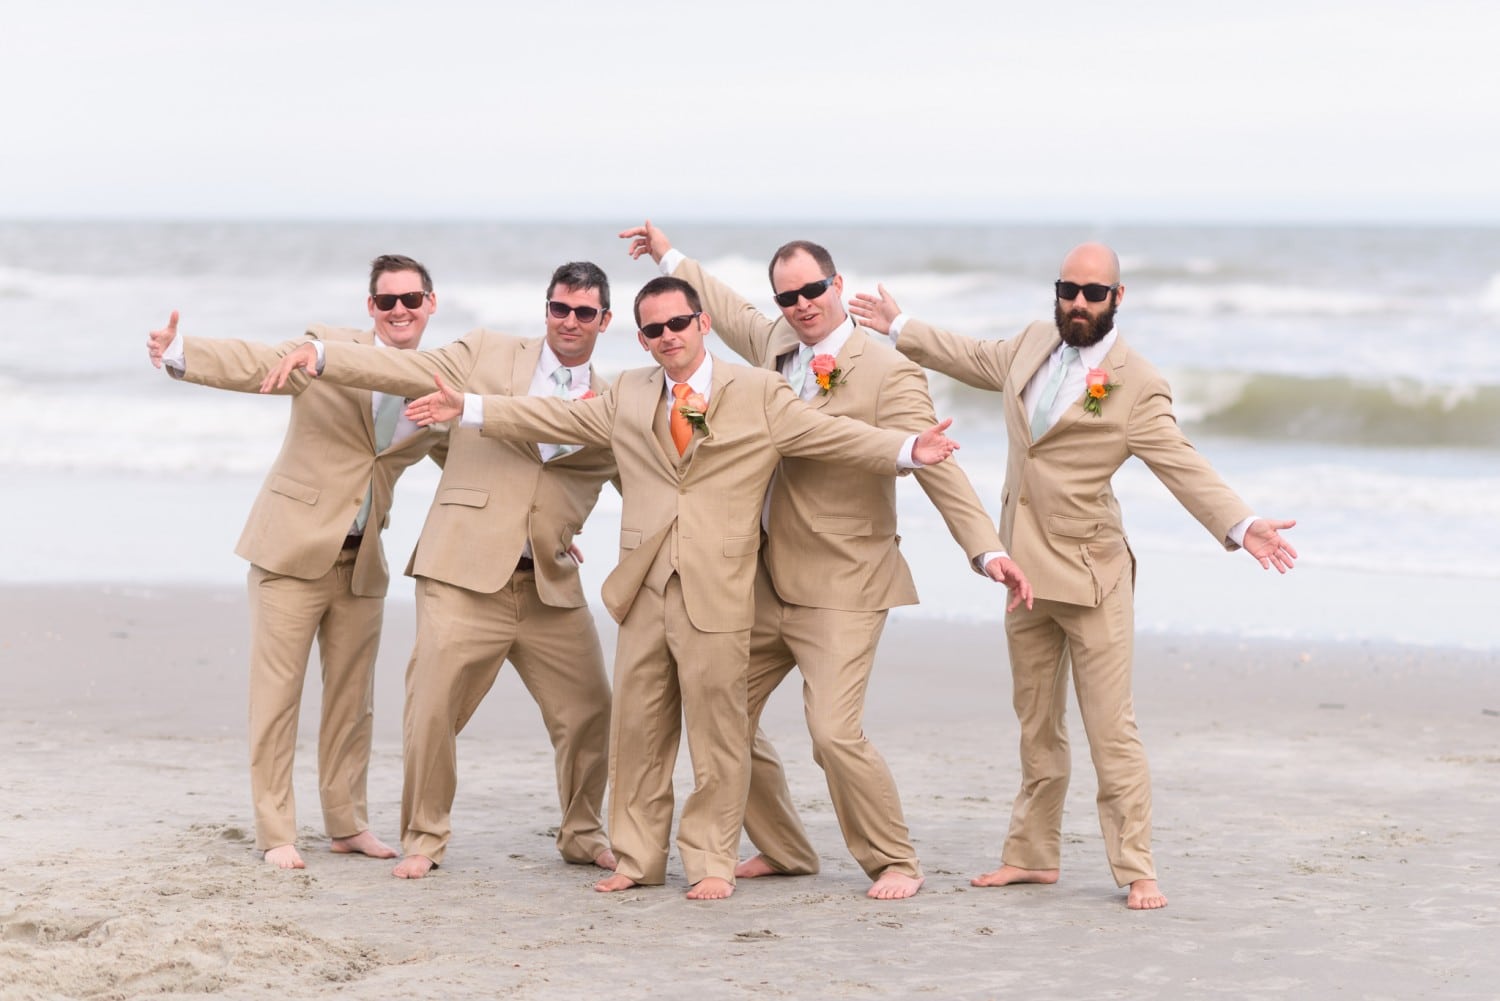 Groomsmen looking cool in their sunglasses - Hilton at Kingston Plantation